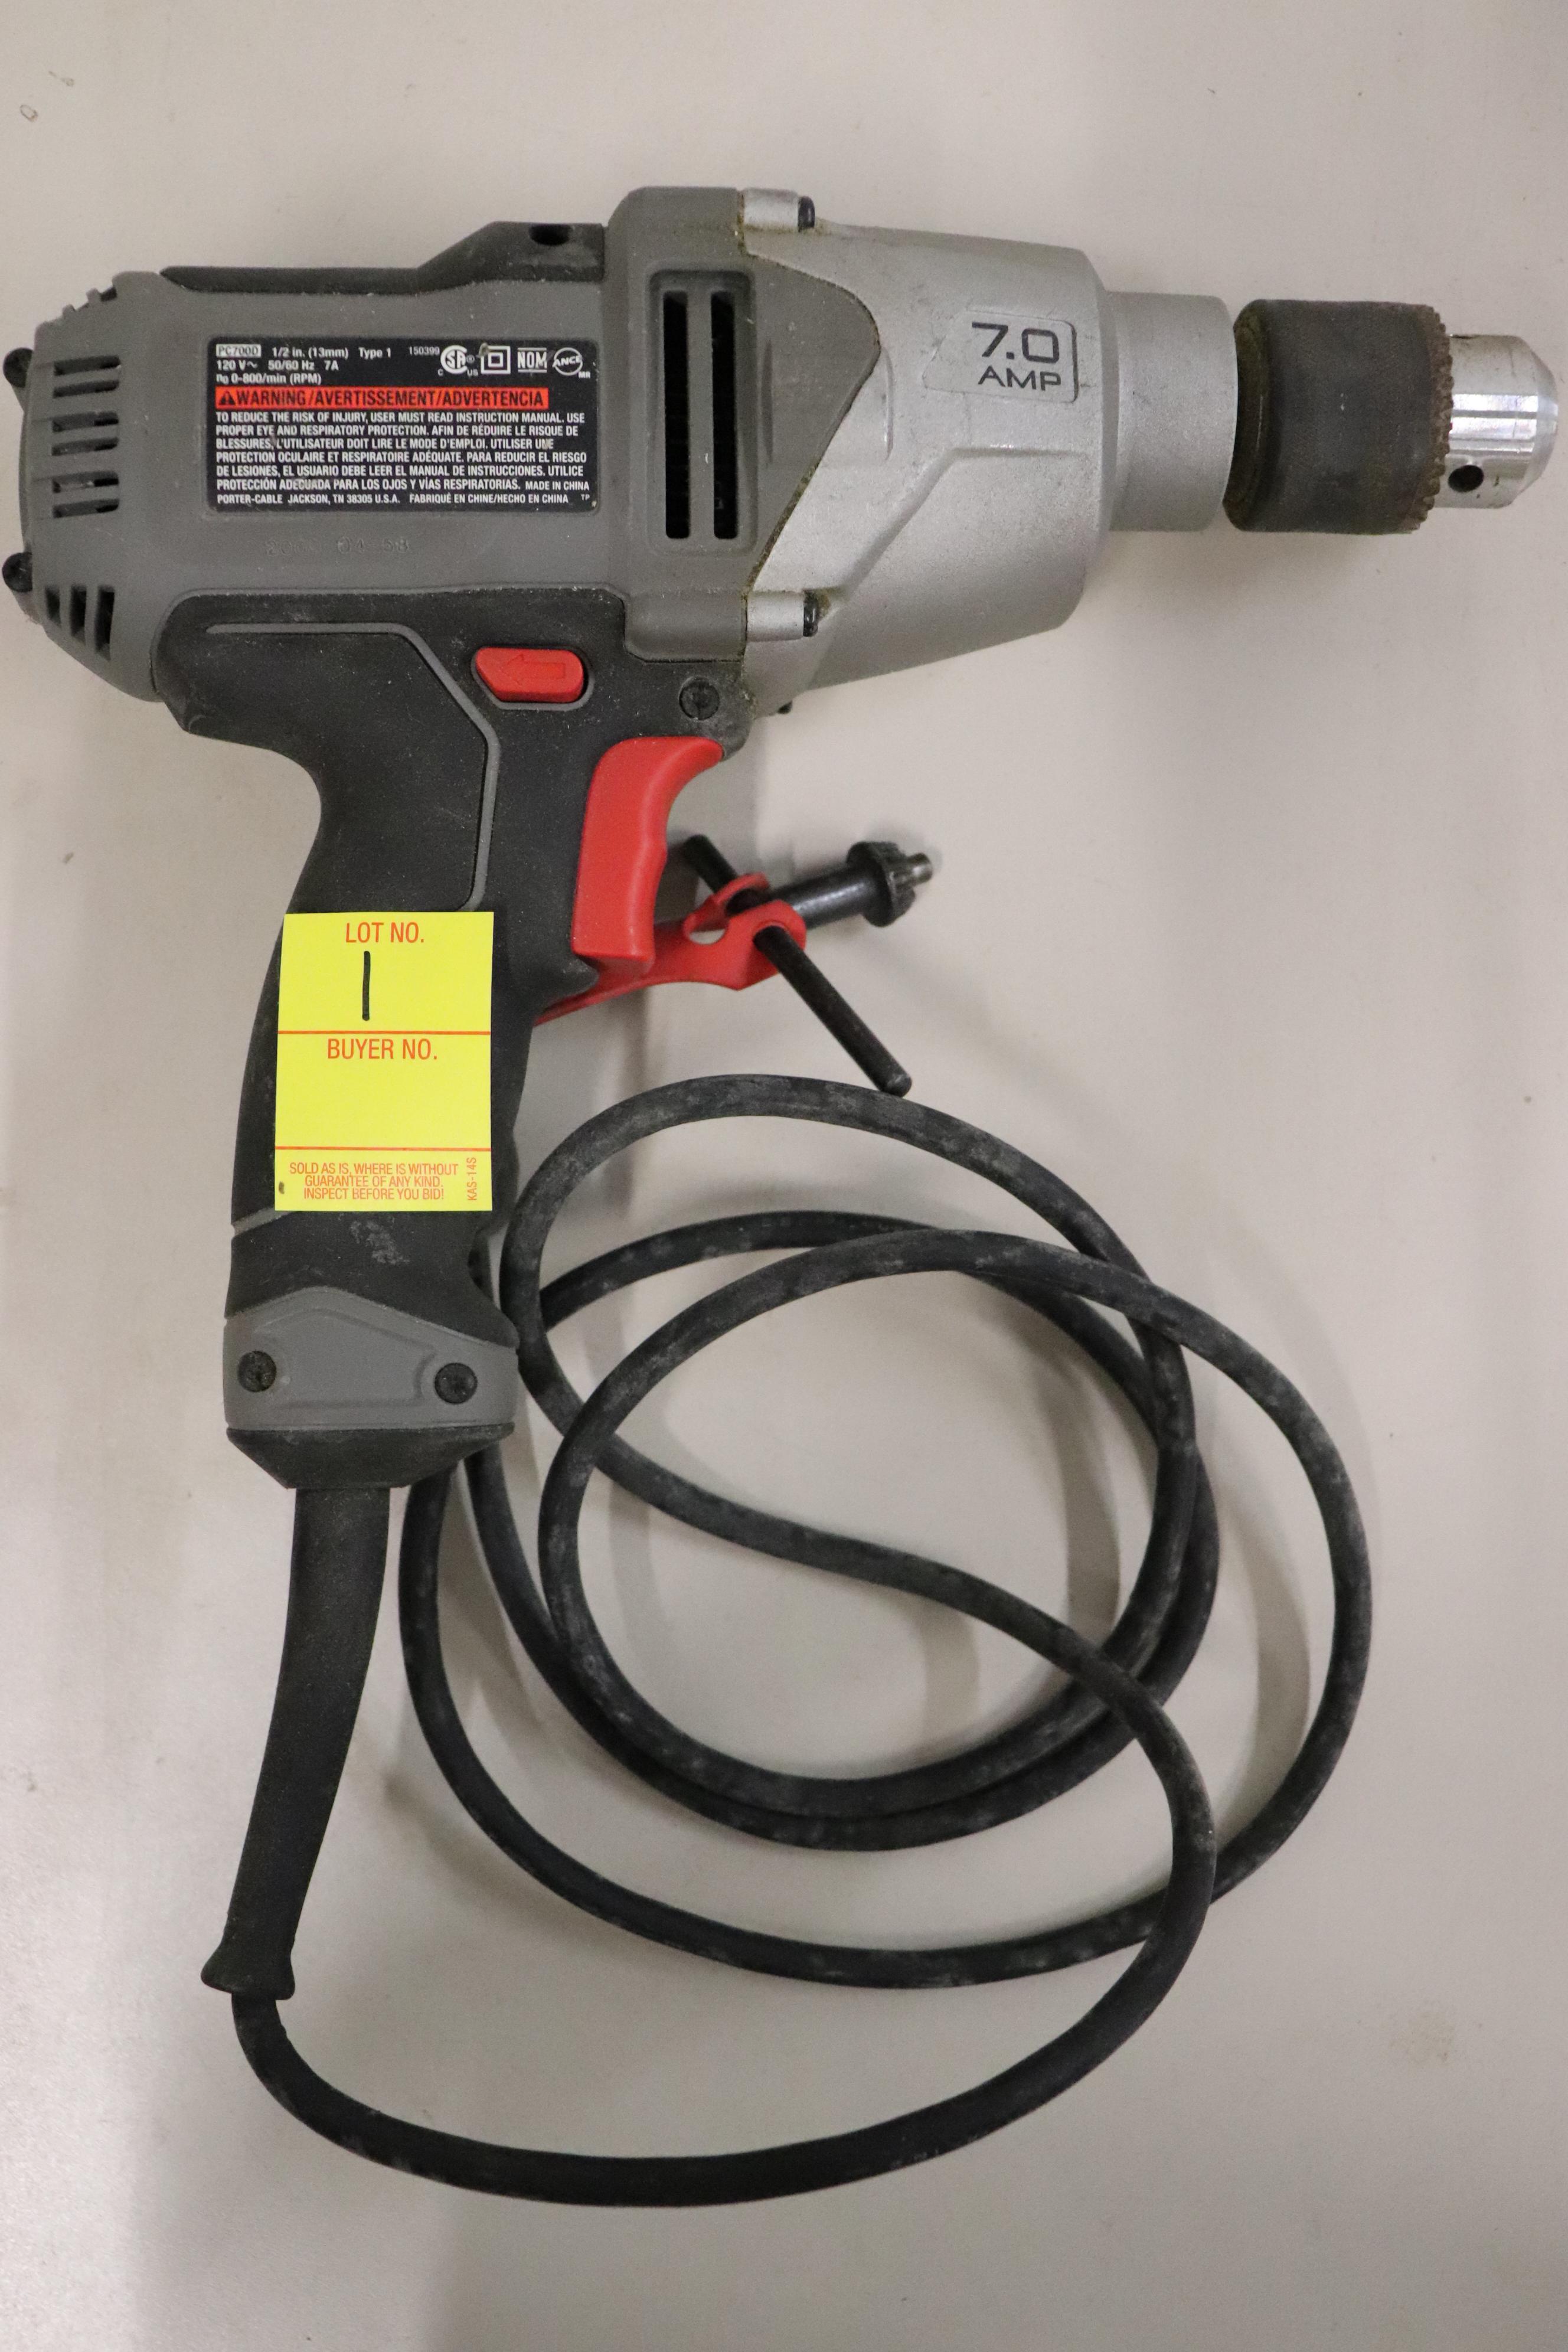 Porter Cable 7.0 AMP Drill